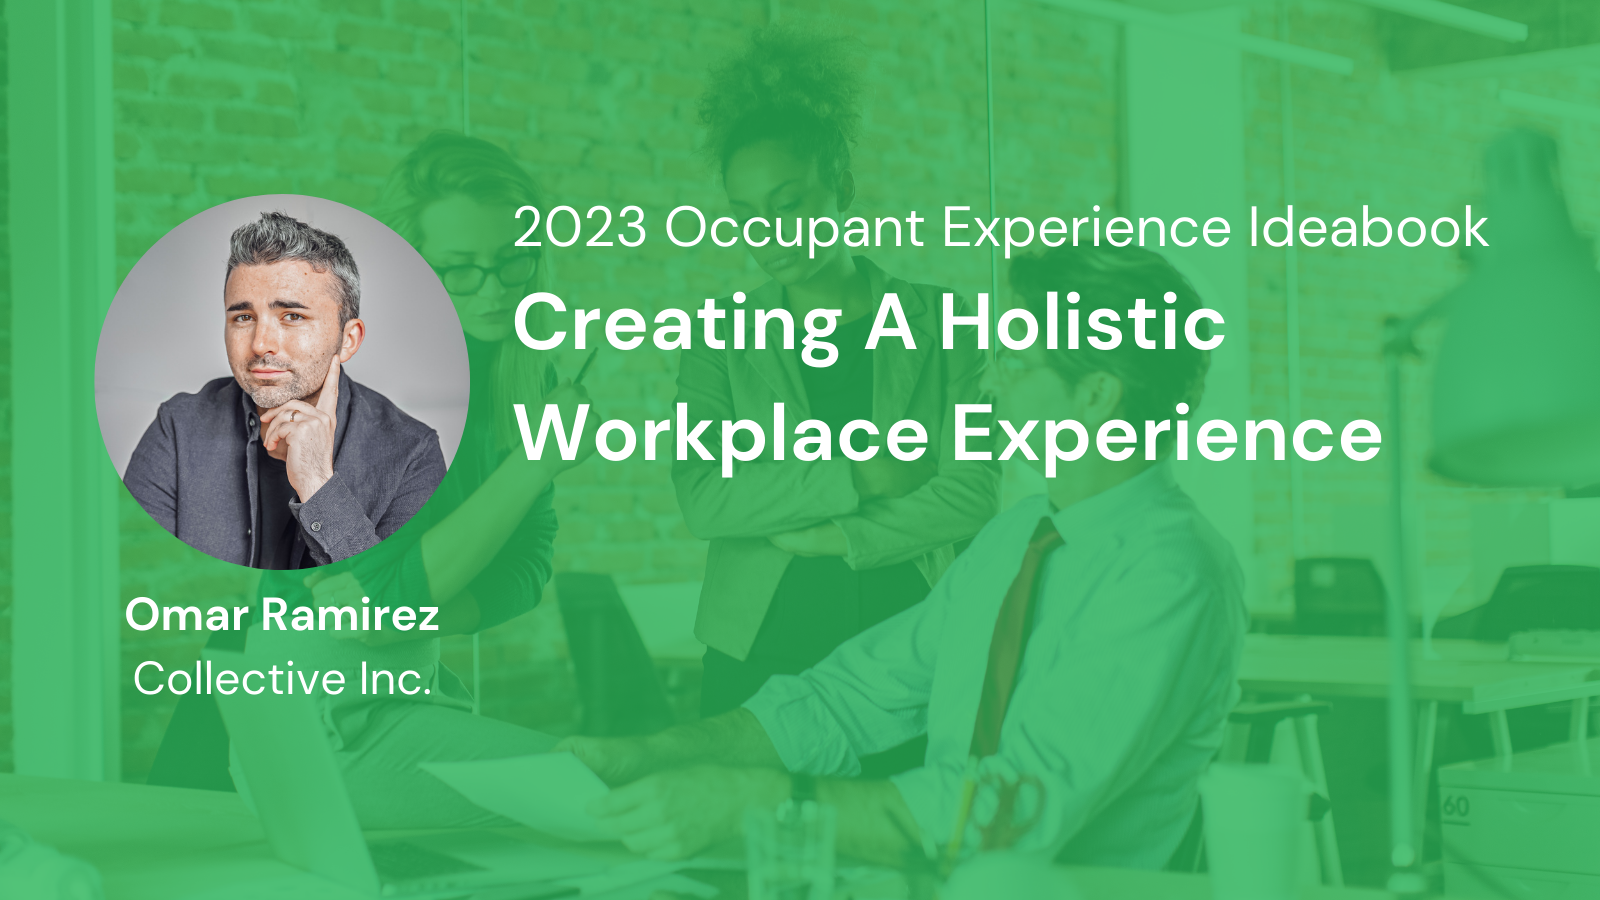 Creating a Holistic Workplace Experience